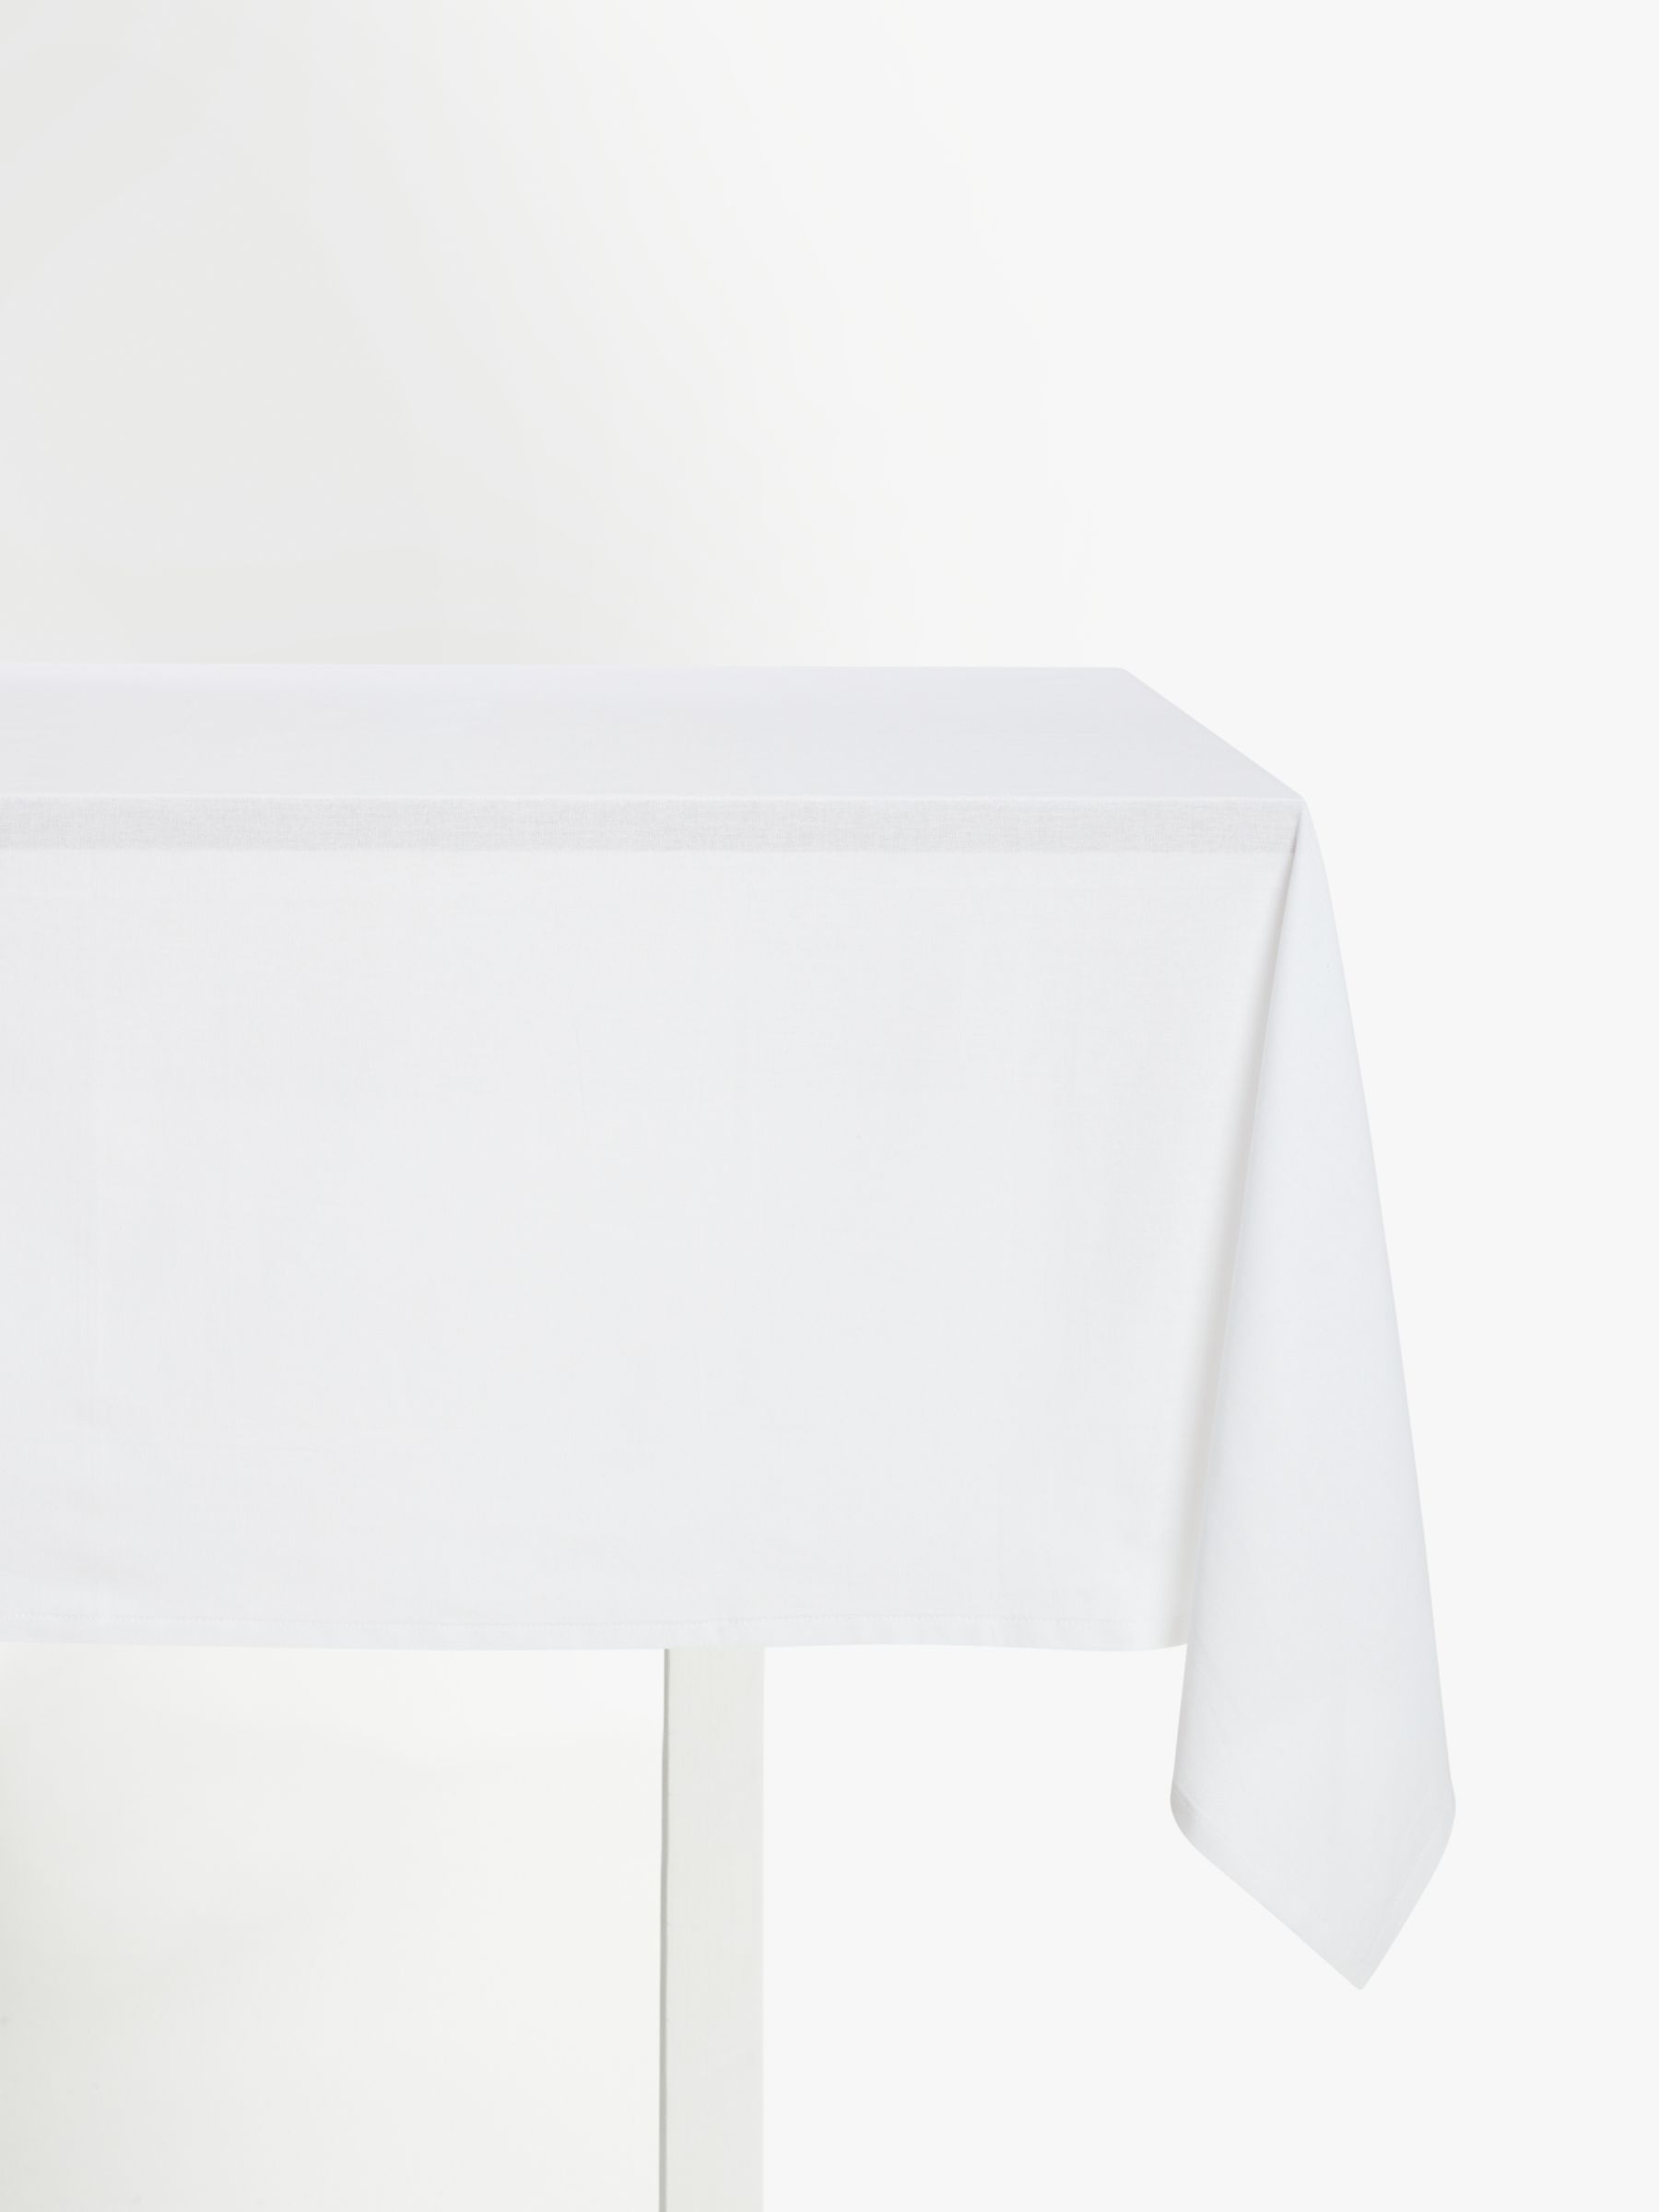 White Tablecloth Square 55 x 55 Inch Solid Striped Jacquard Table